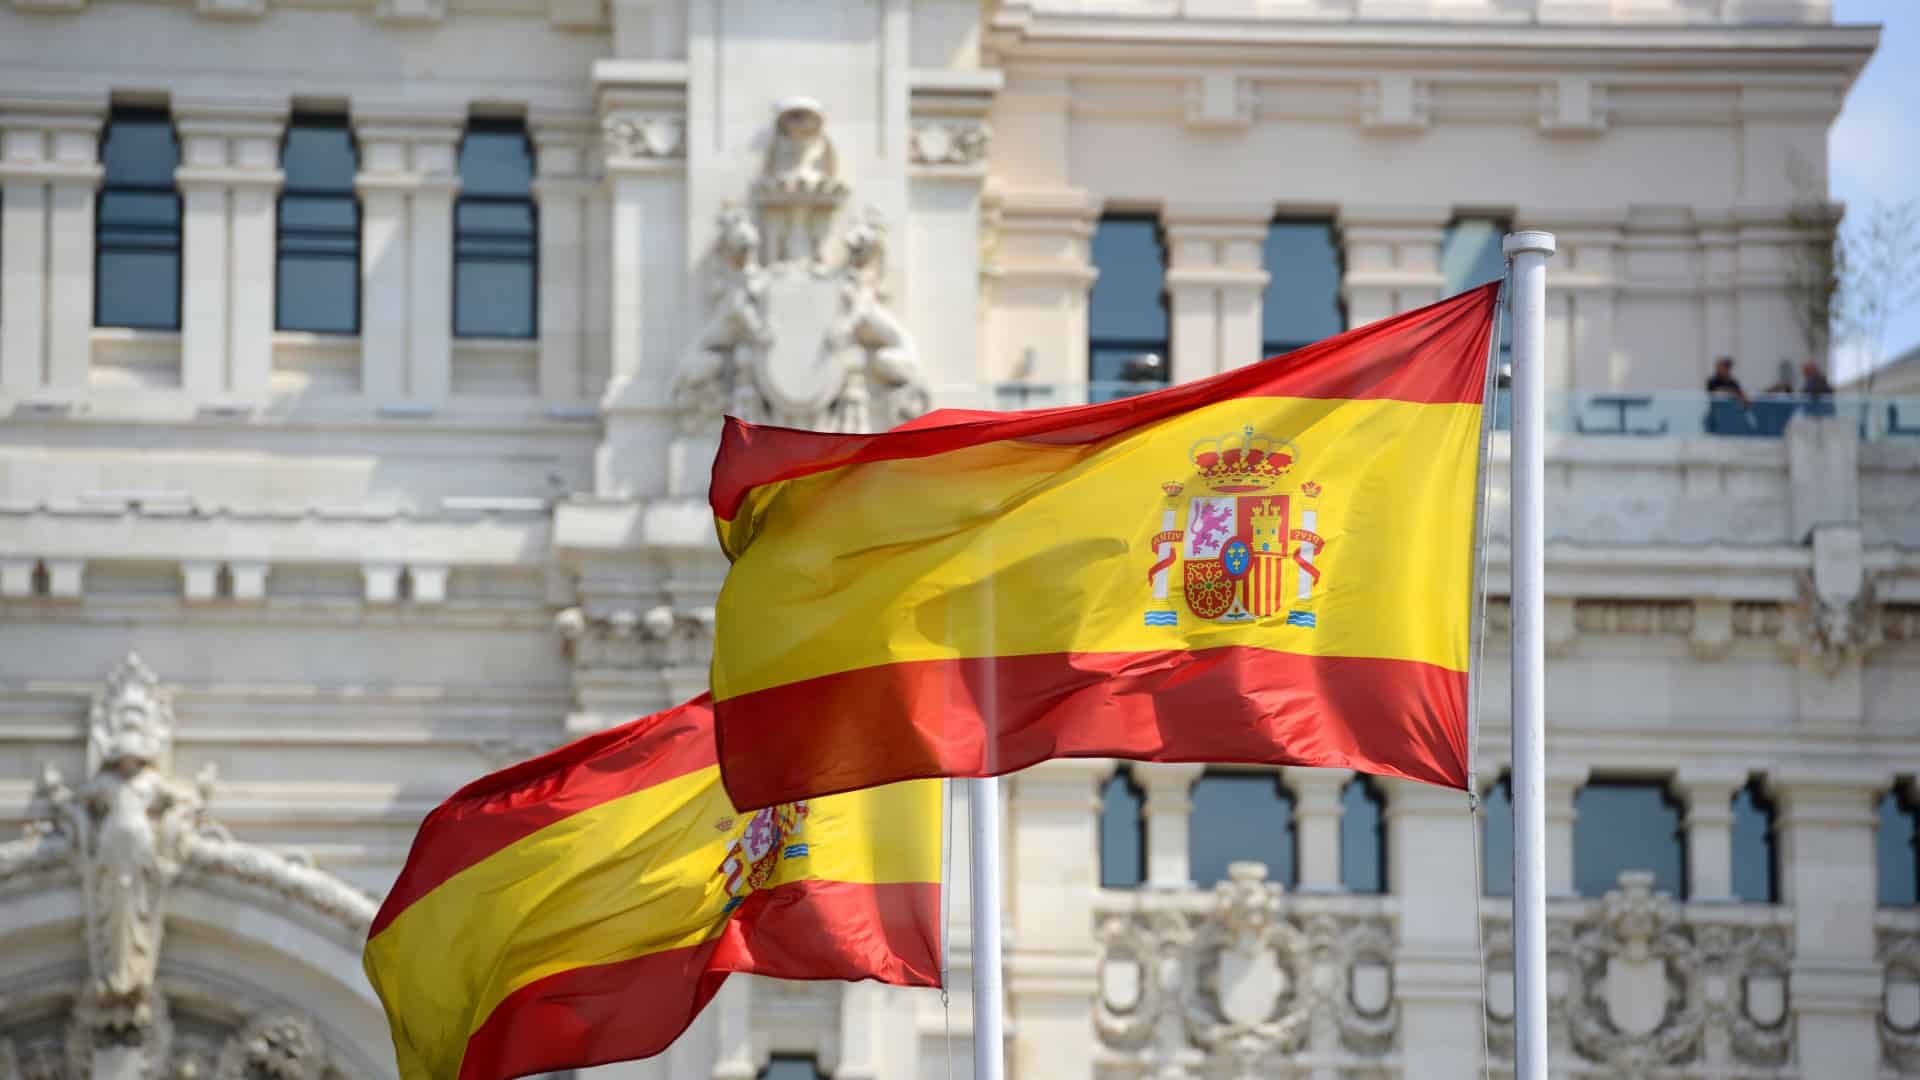 Spain’s Incentives to Counter Russia, Support Ukraine’s NATO Accession, and Grow its Strategic Presence in Europe